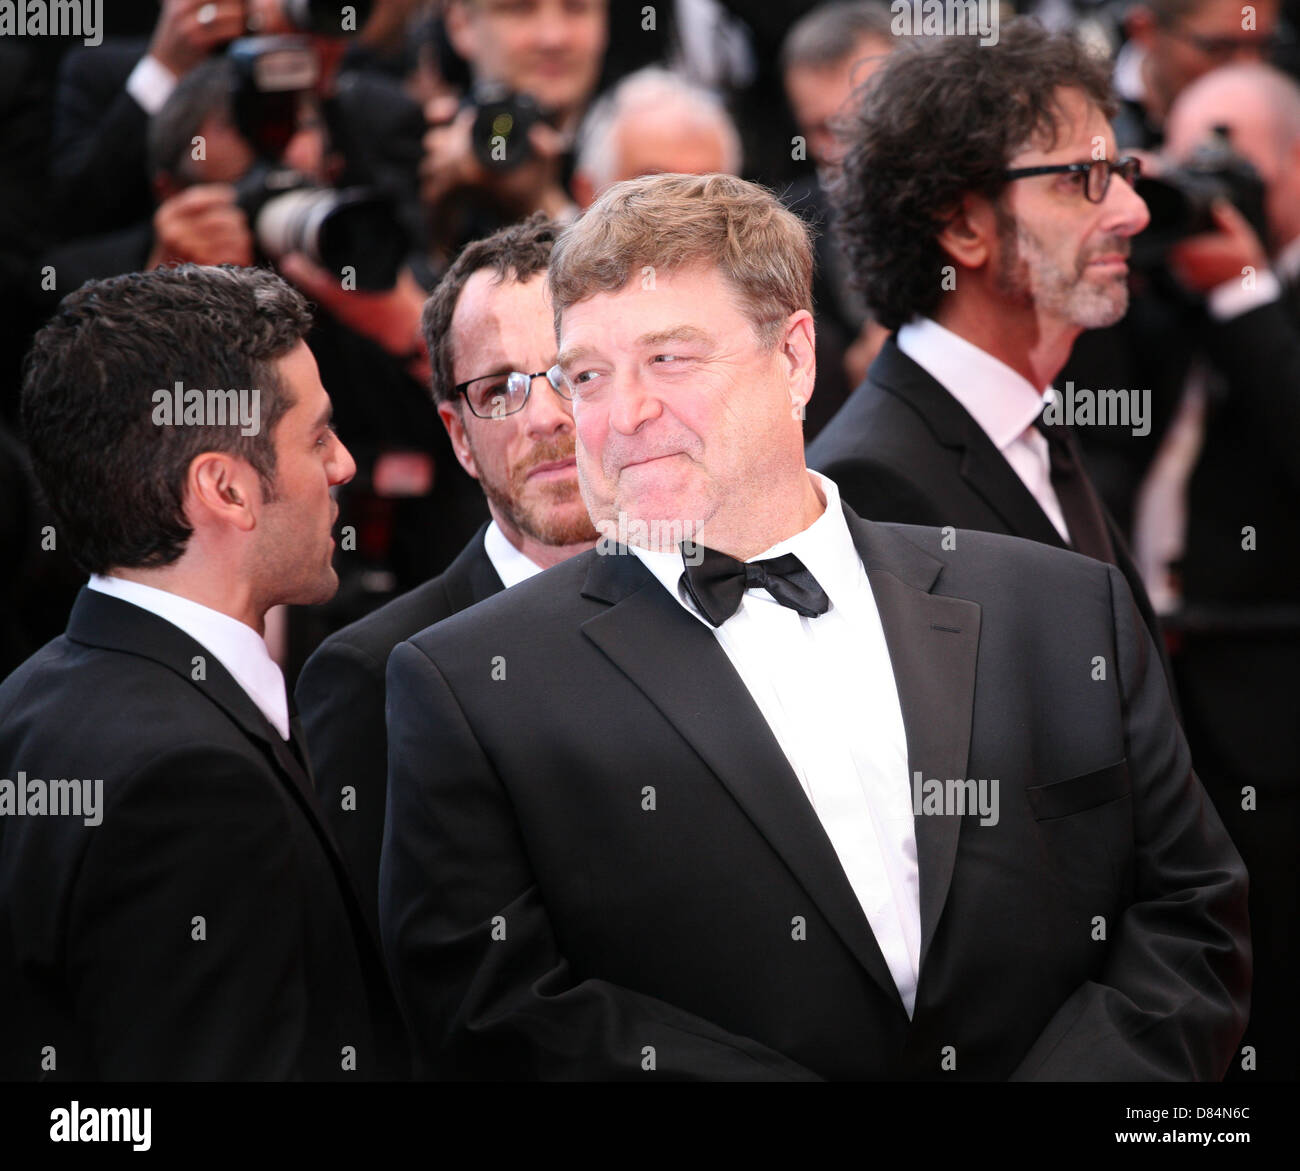 Oscar Isaac,John Goodman, Joel Coen,  at the The Coen brother’s new film ‘Inside Llewyn Davis’ red carpet gala screening at the Cannes Film Festival Sunday 19th May 2013 Stock Photo